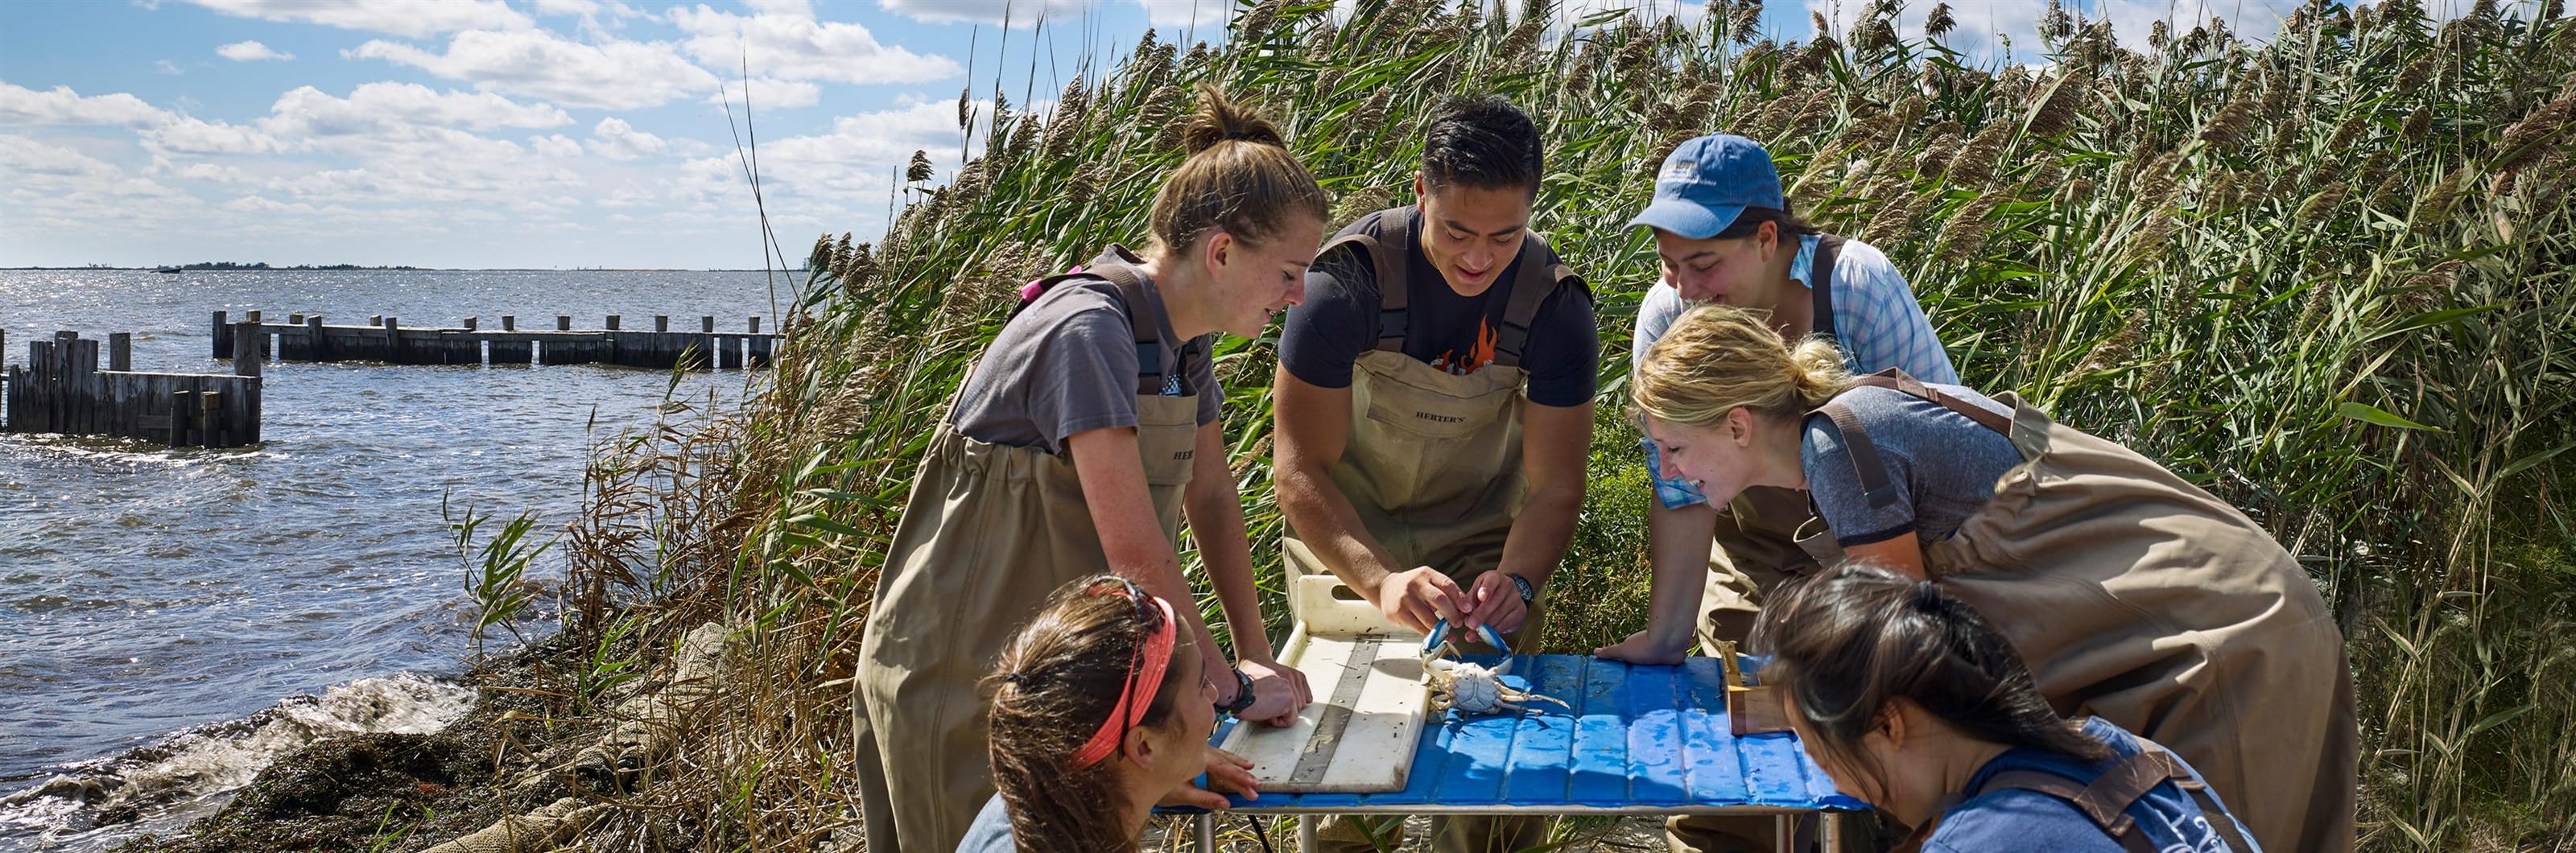 Students examining a crab near the water in Barnegat Light